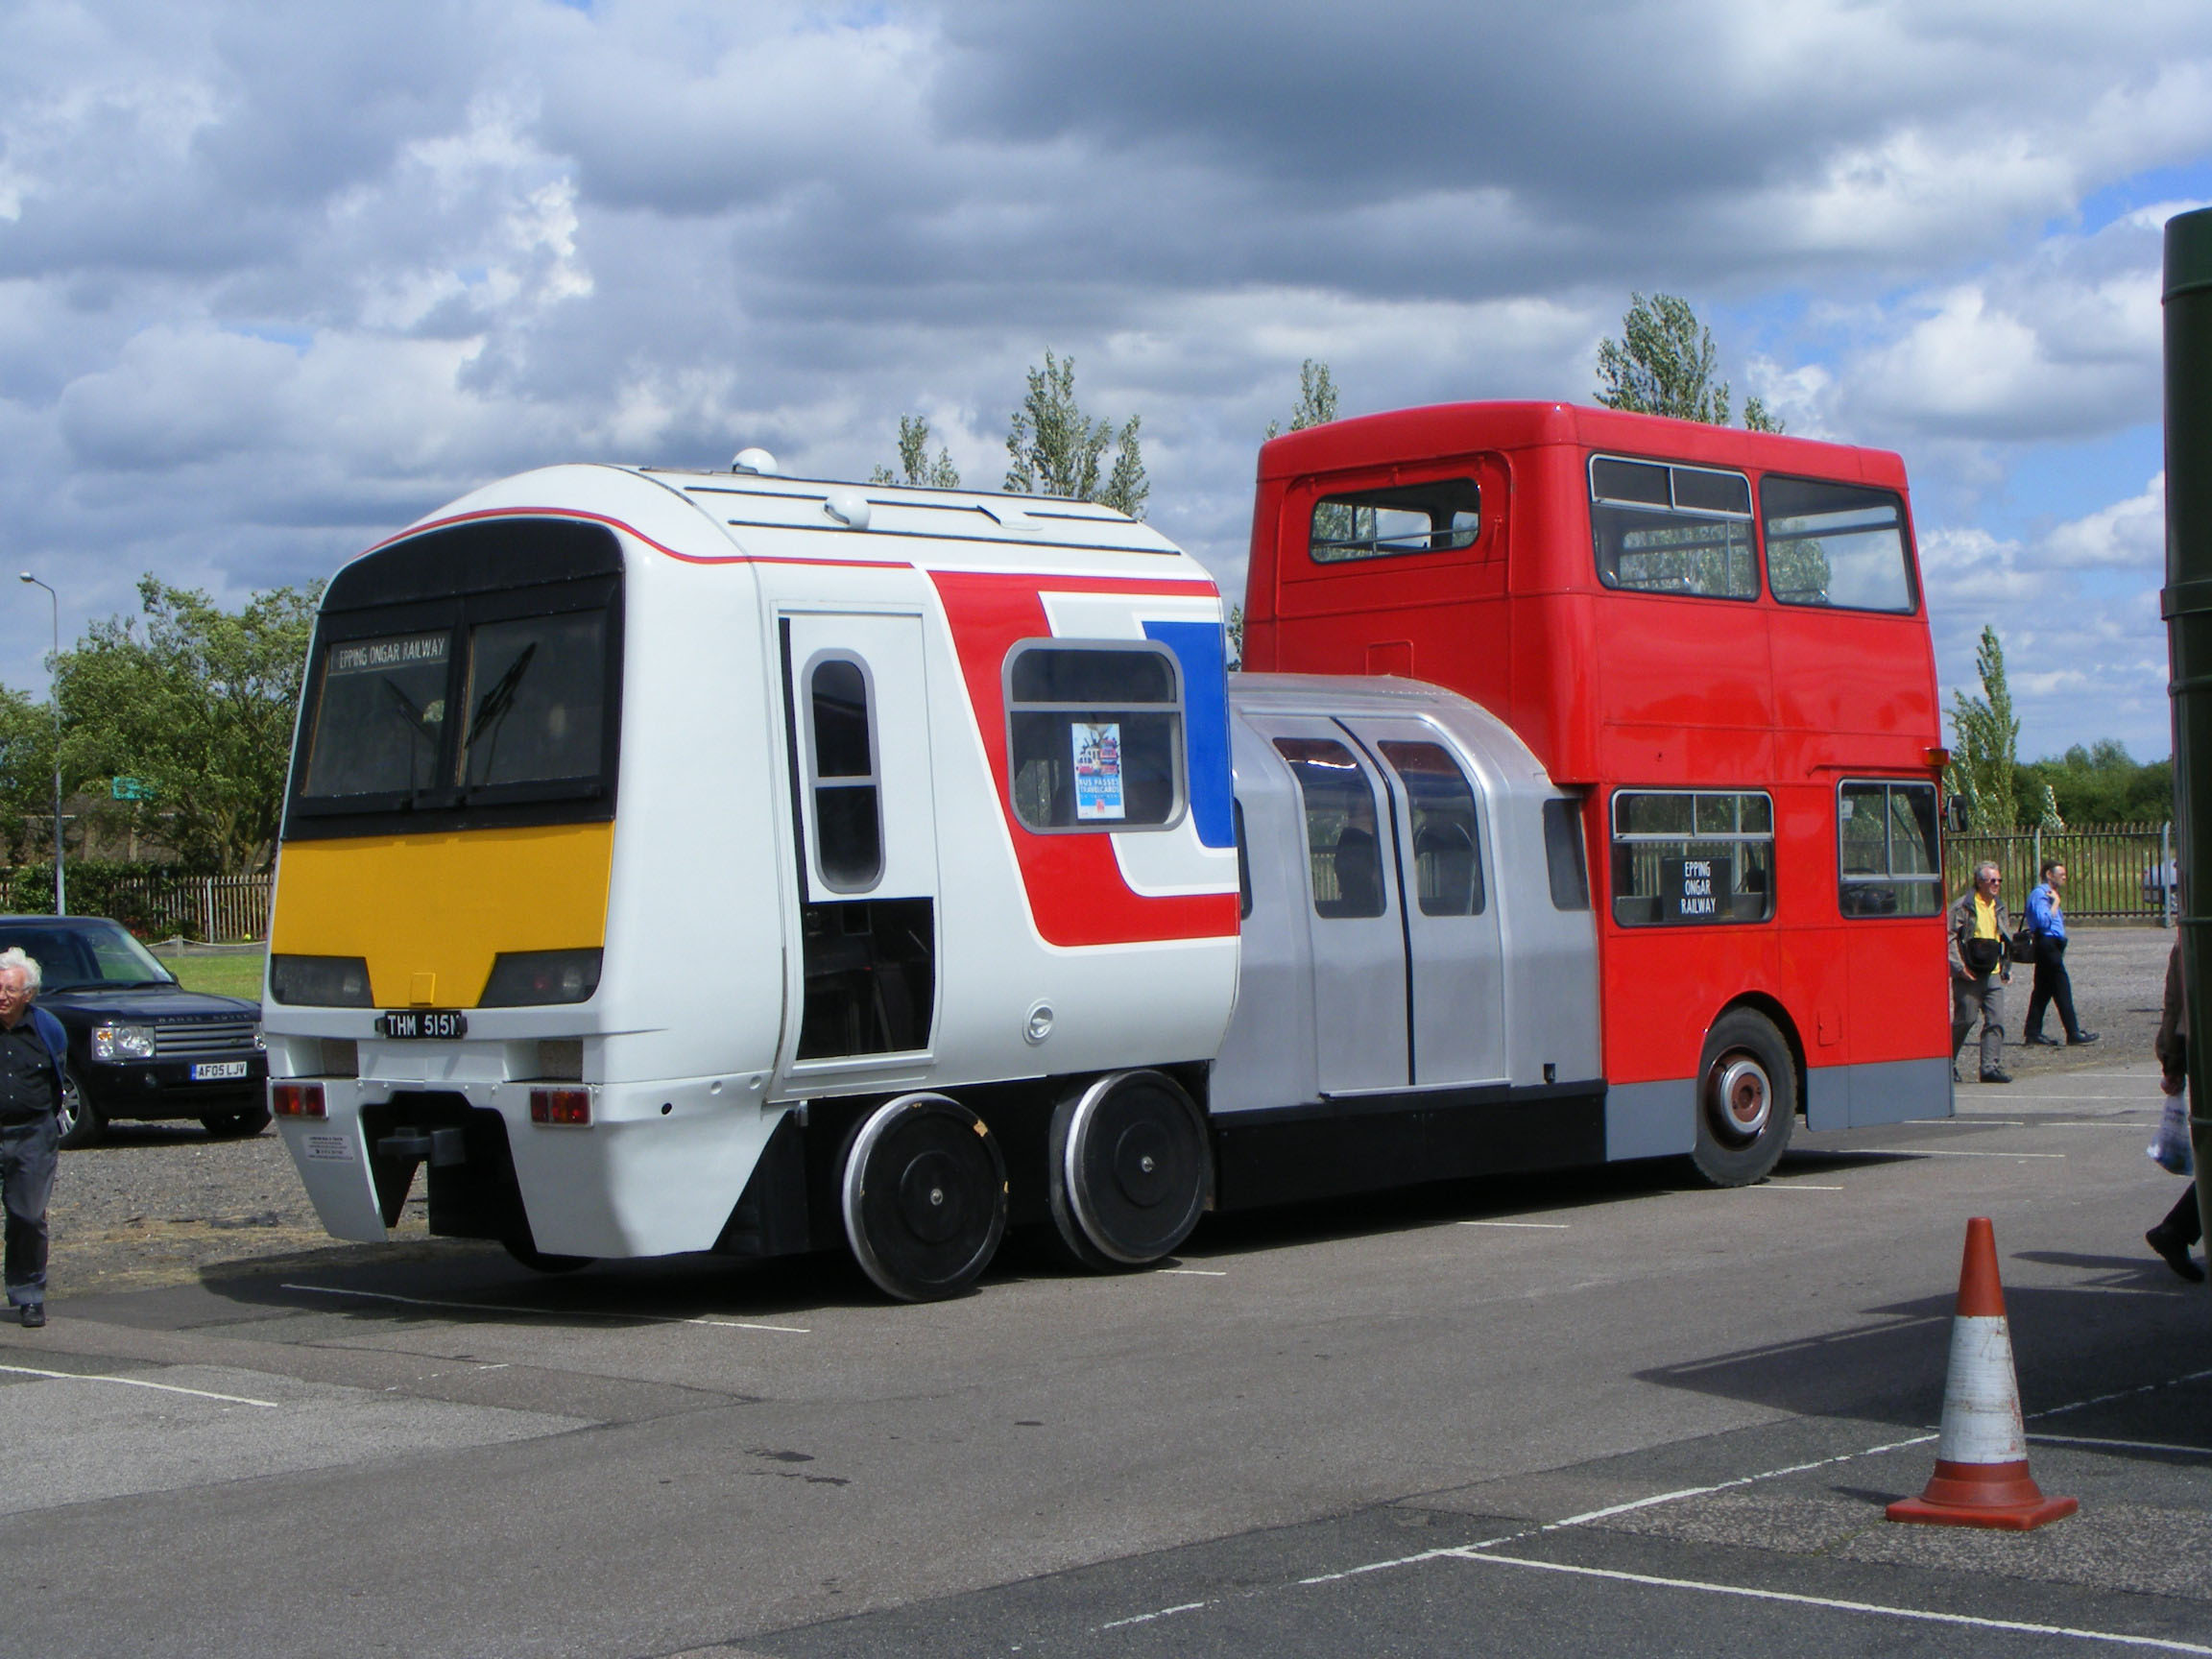  train, it became the property of London Underground. It is seen here